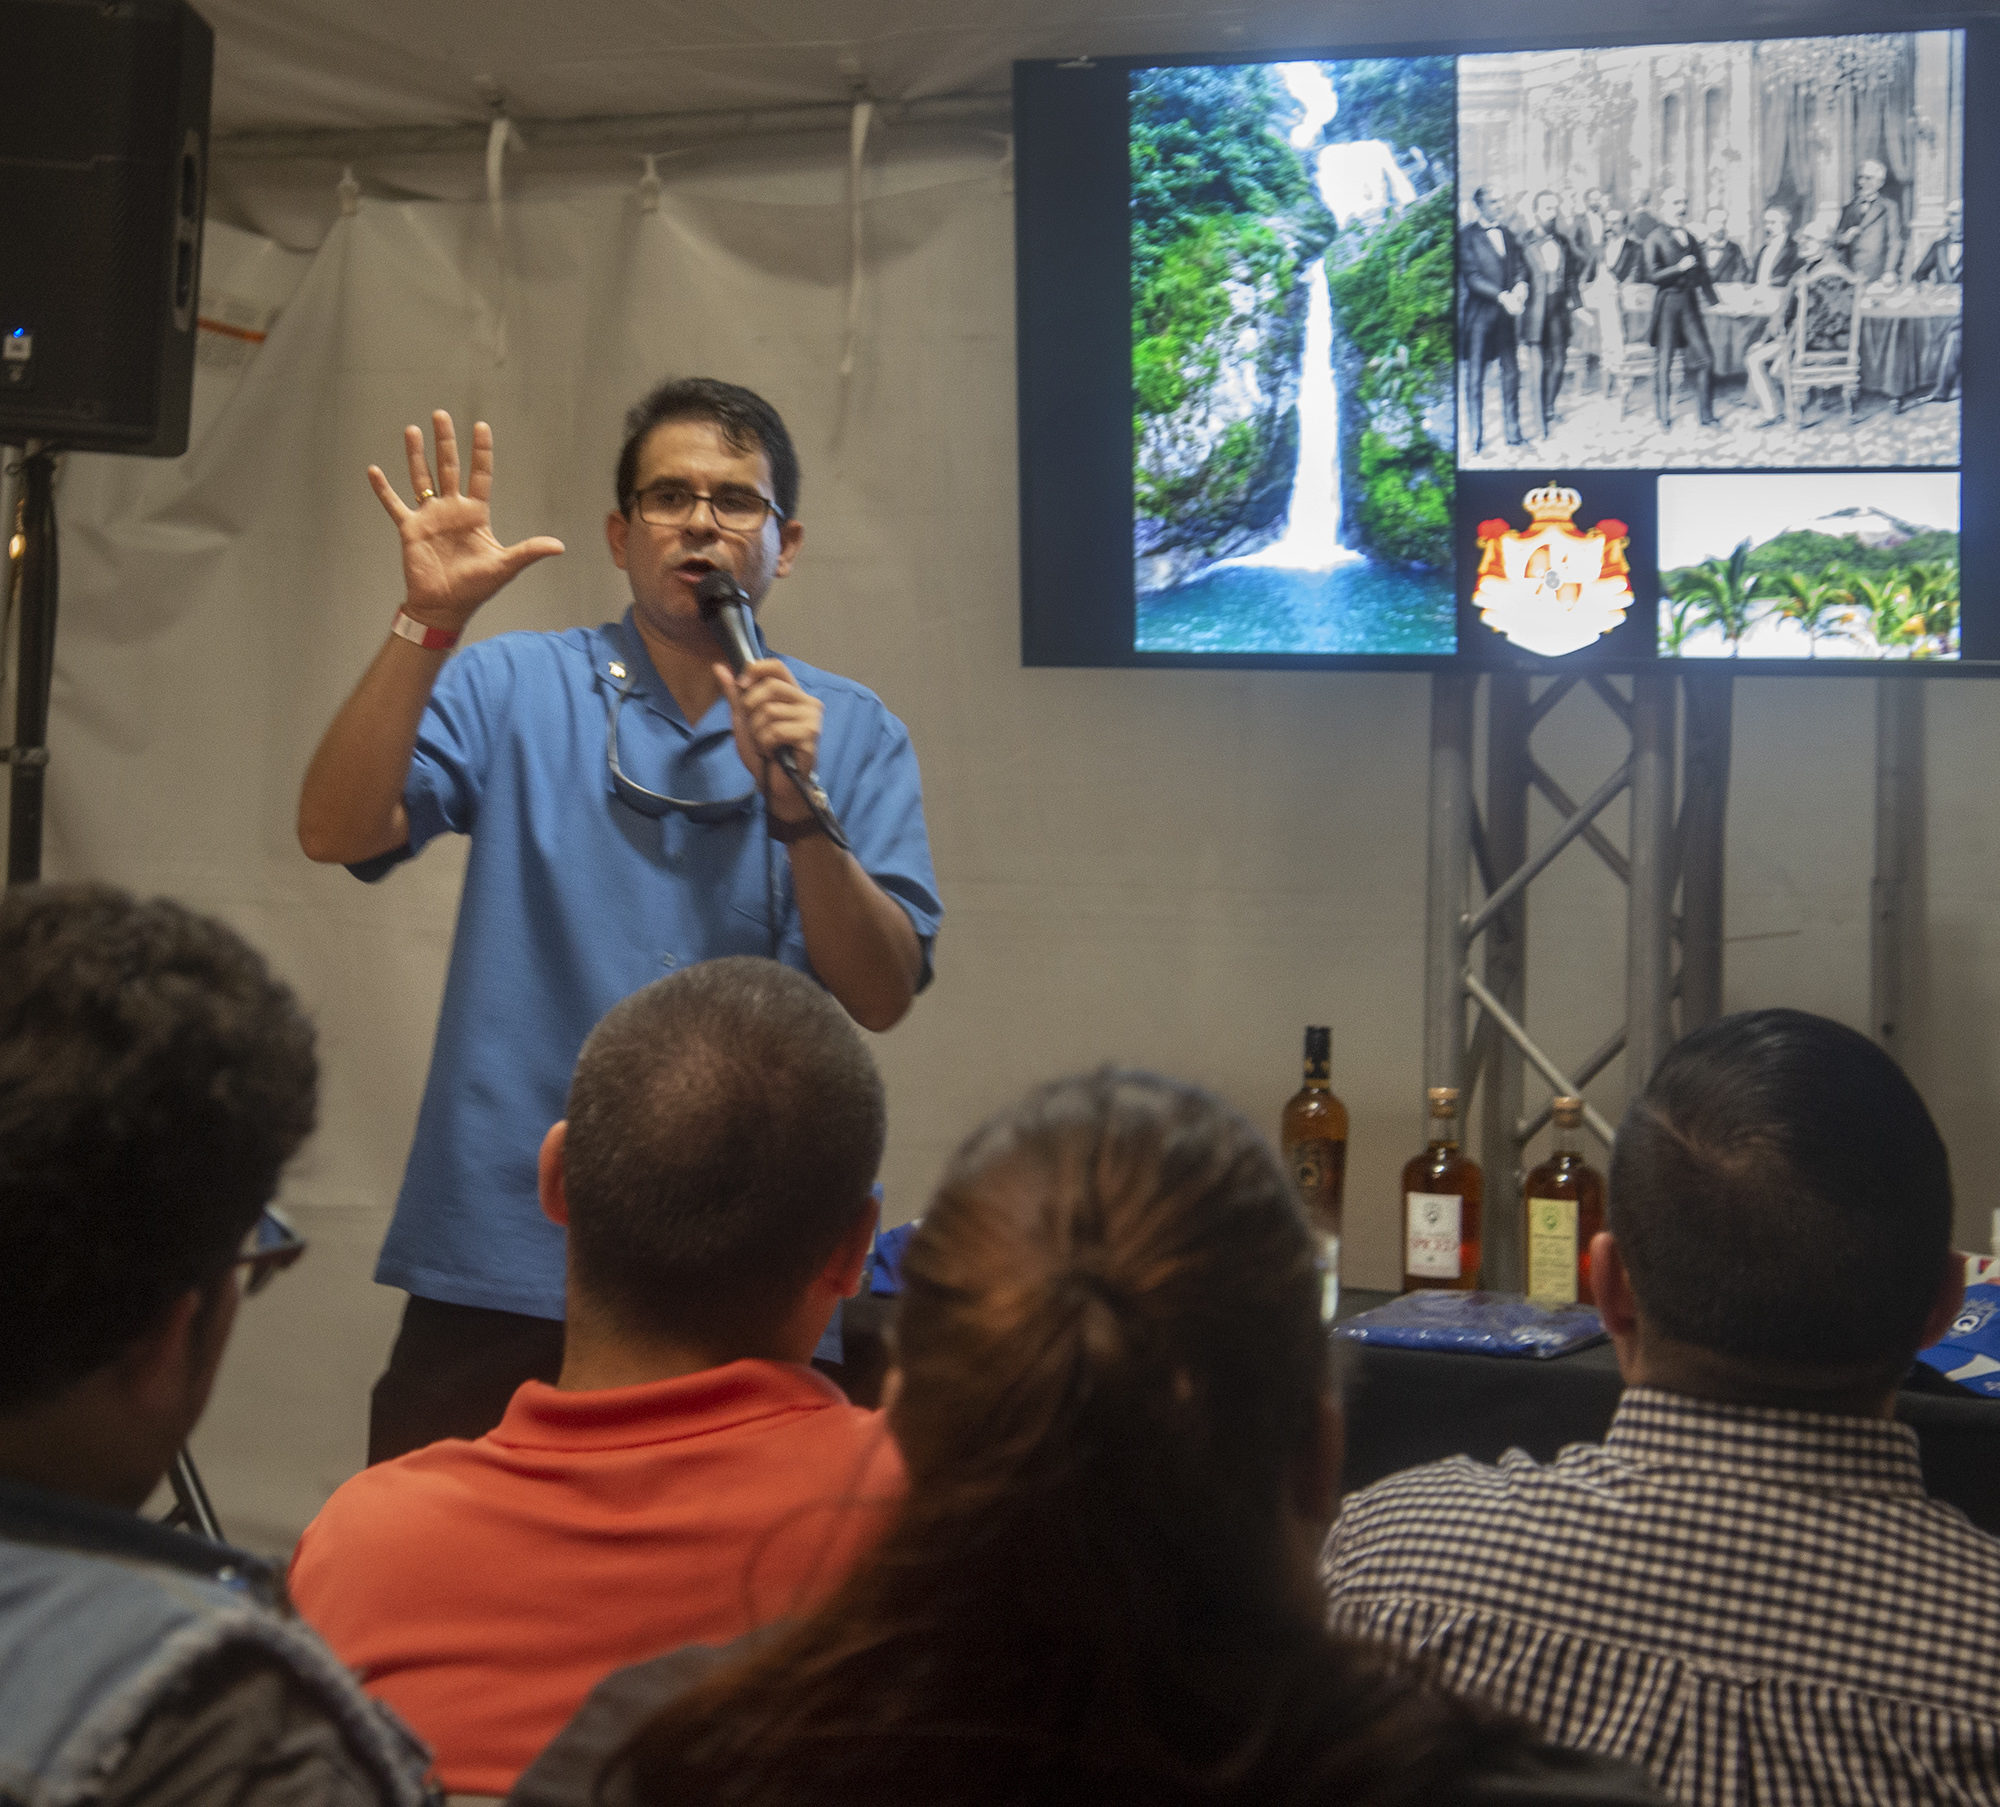 Jaiker Soto, rum distiller and master blender, educates visitors in the Don Q tent at the Taste of Rum festival. Photo by Sarah Price